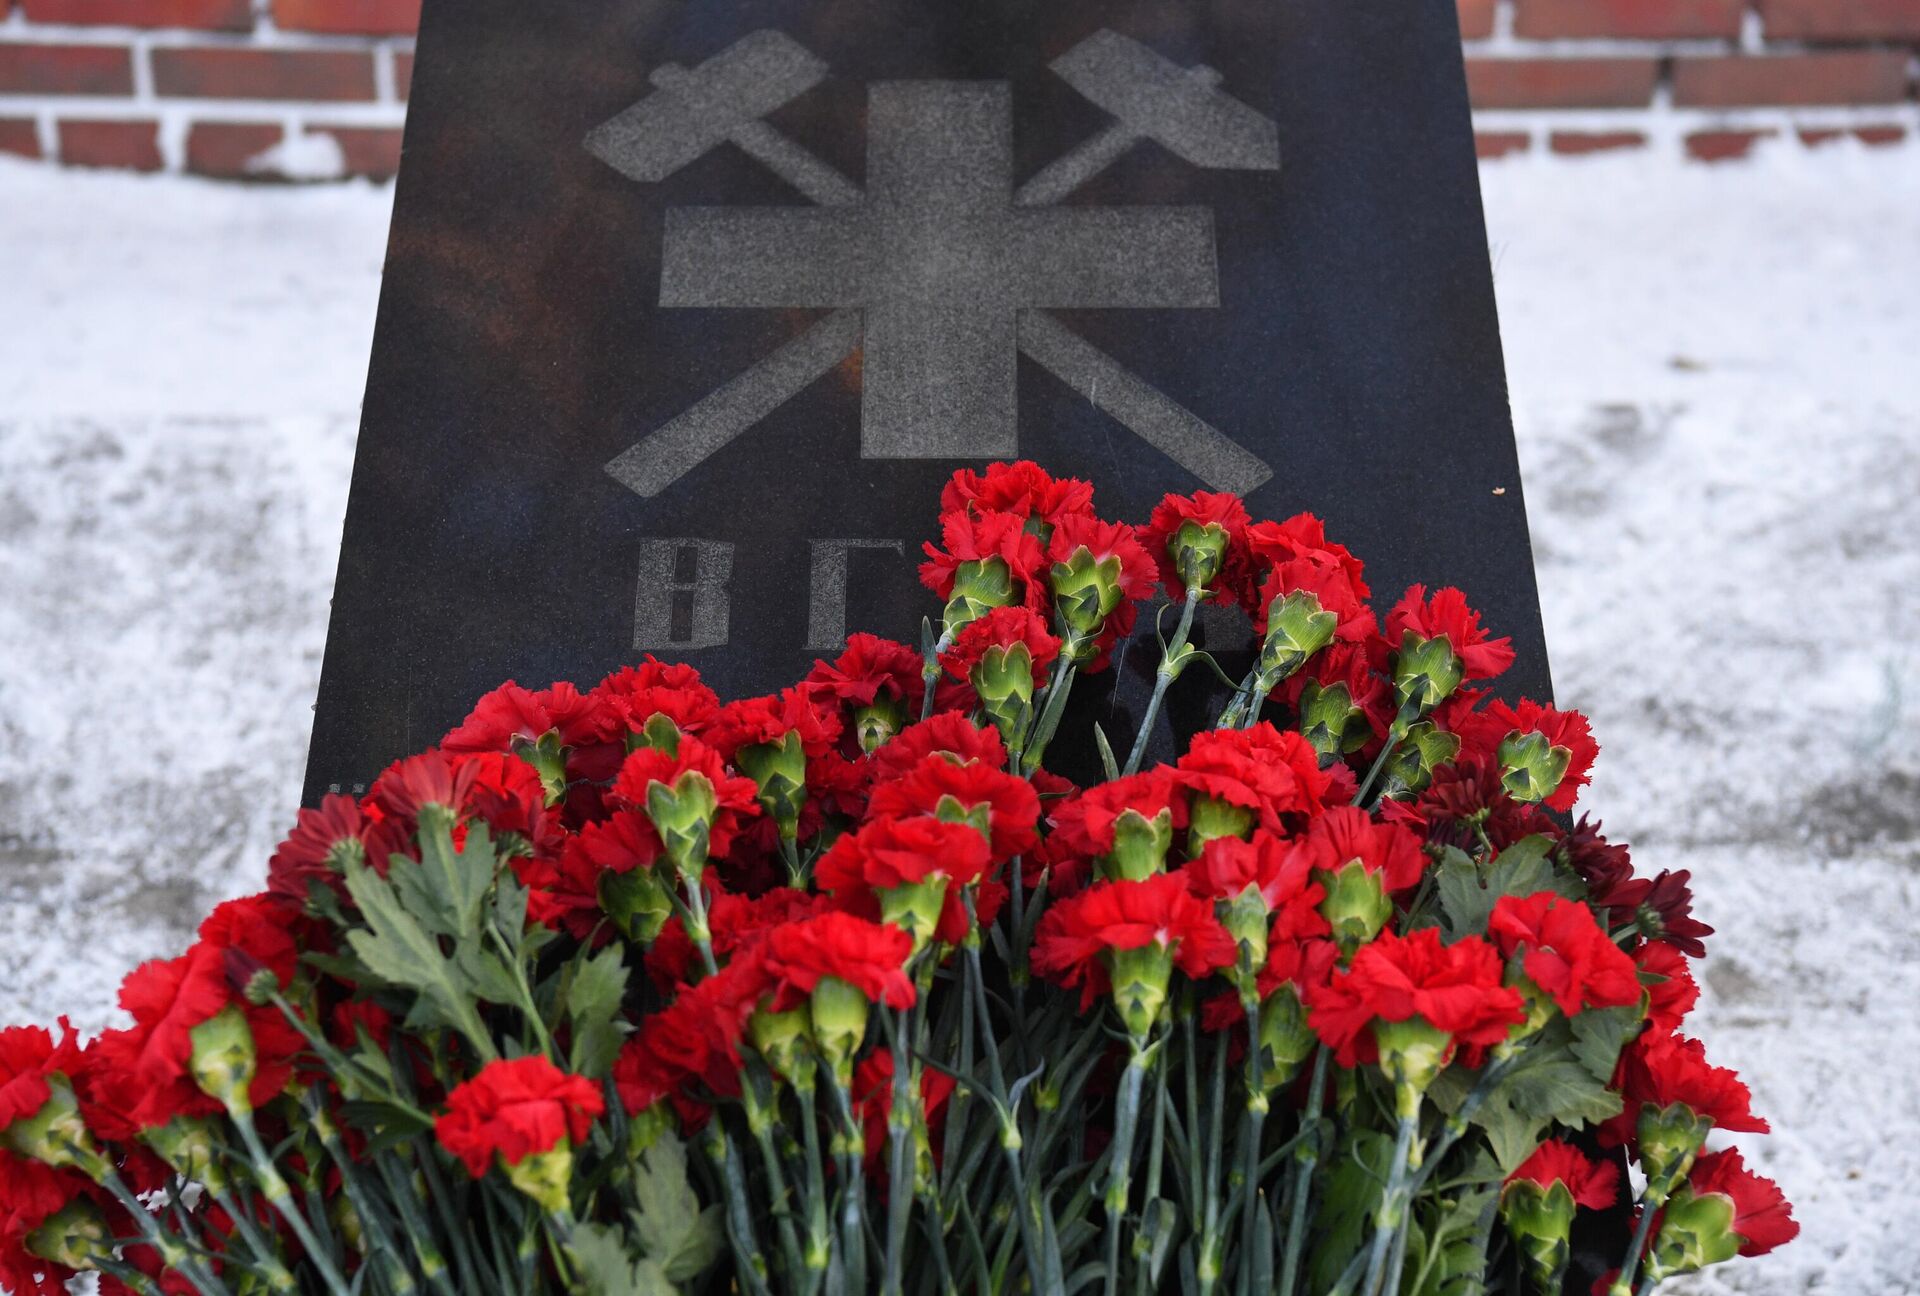 Flowers at a memorial to those killed in an accident at the Listvyazhnaya mine in the Kemerovo Region, Russia. - Sputnik International, 1920, 28.11.2021